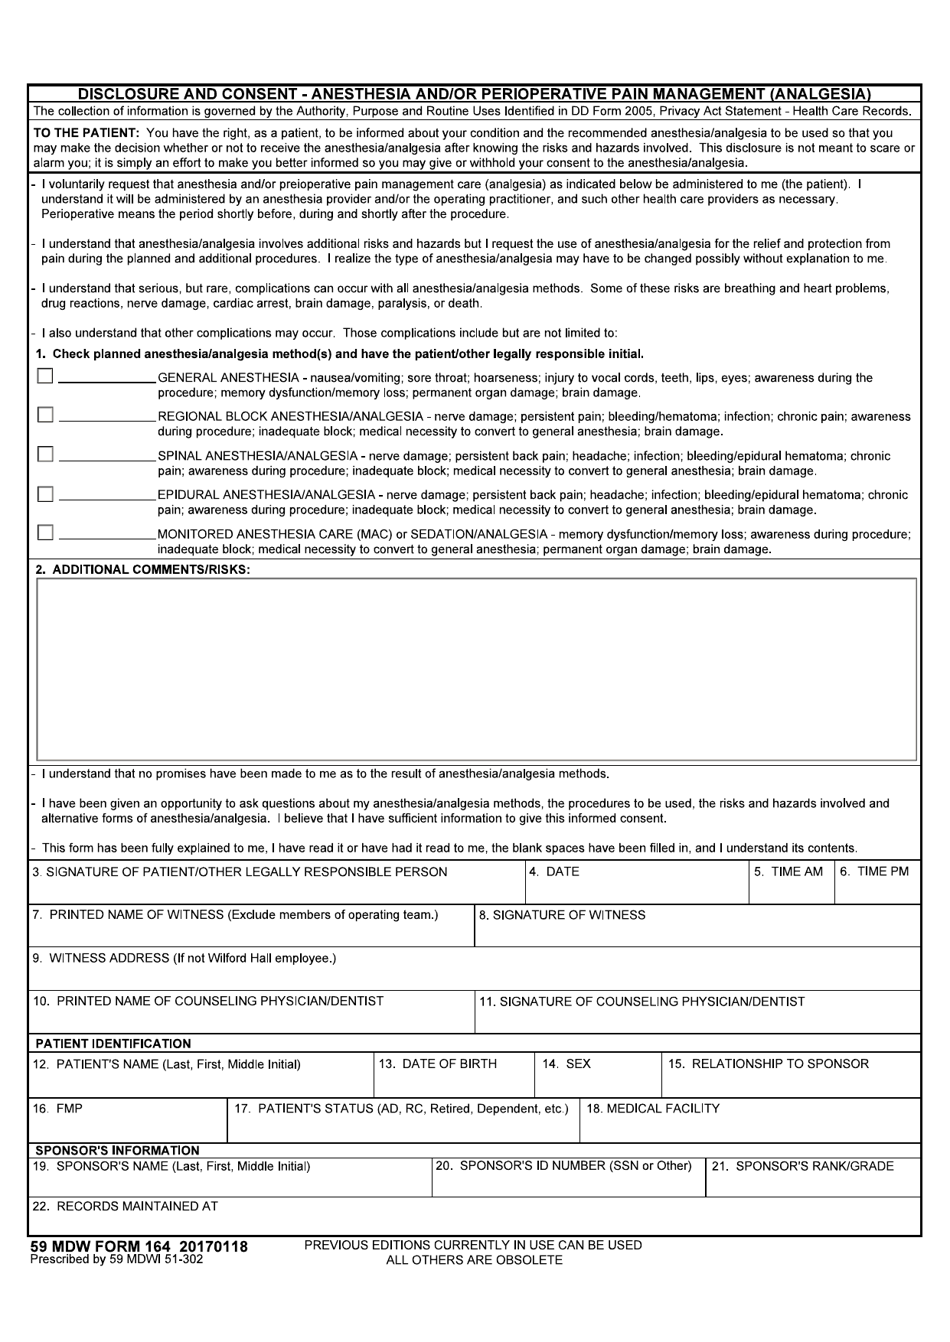 59 MDW Form 164 Disclosure and Consent - Anesthesia and / or Perioperative Pain Management (Analgesia), Page 1